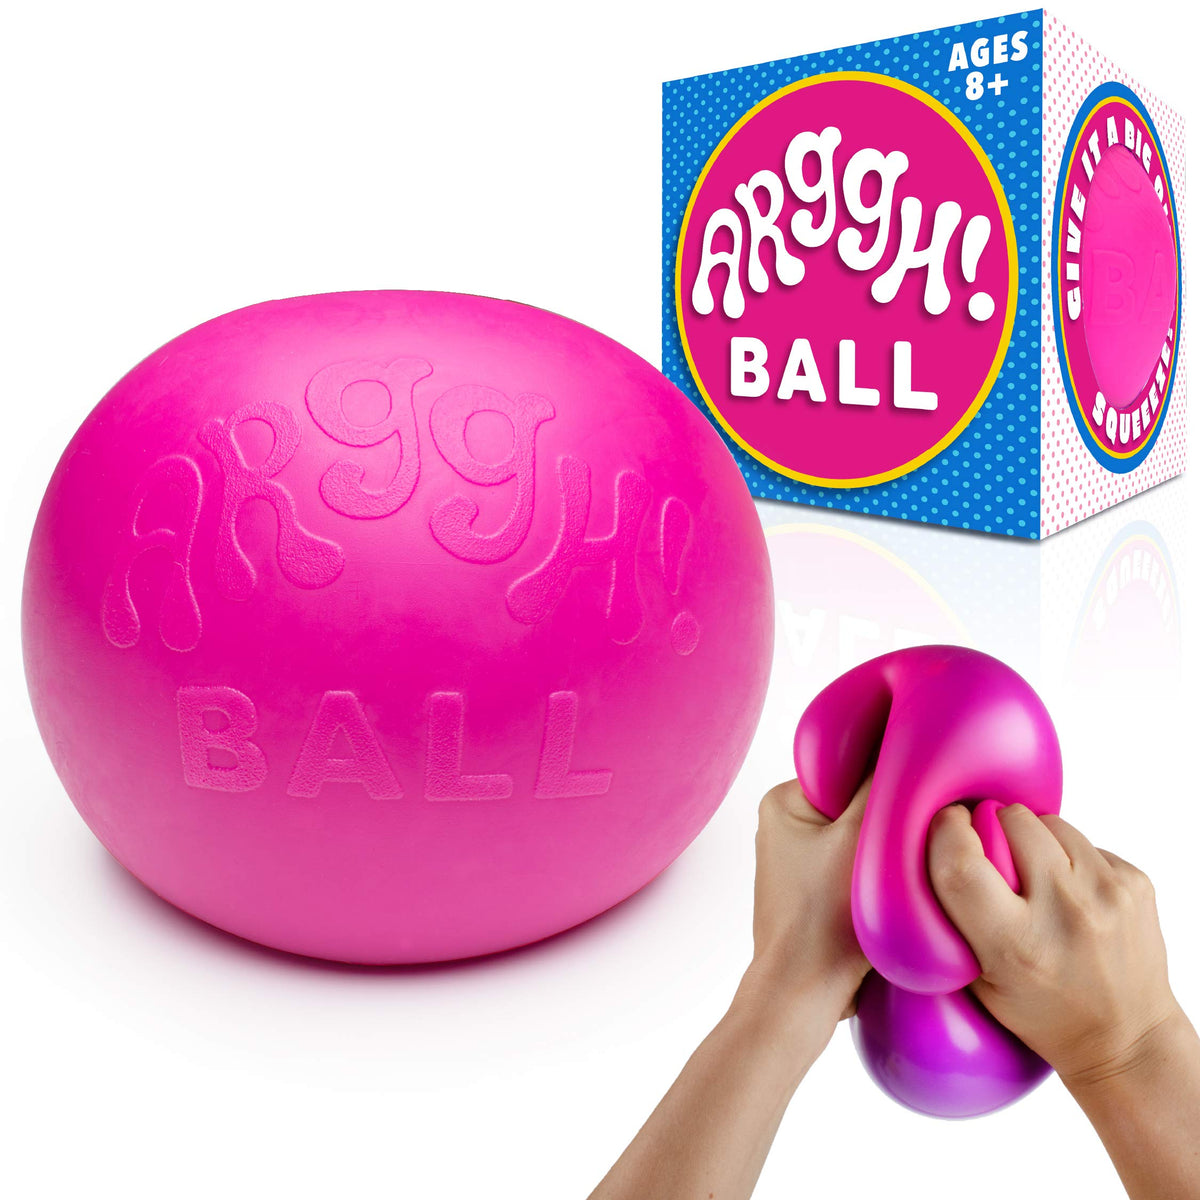 Arggh Giant Stress Ball - Gifteee Unique Cool Gifts